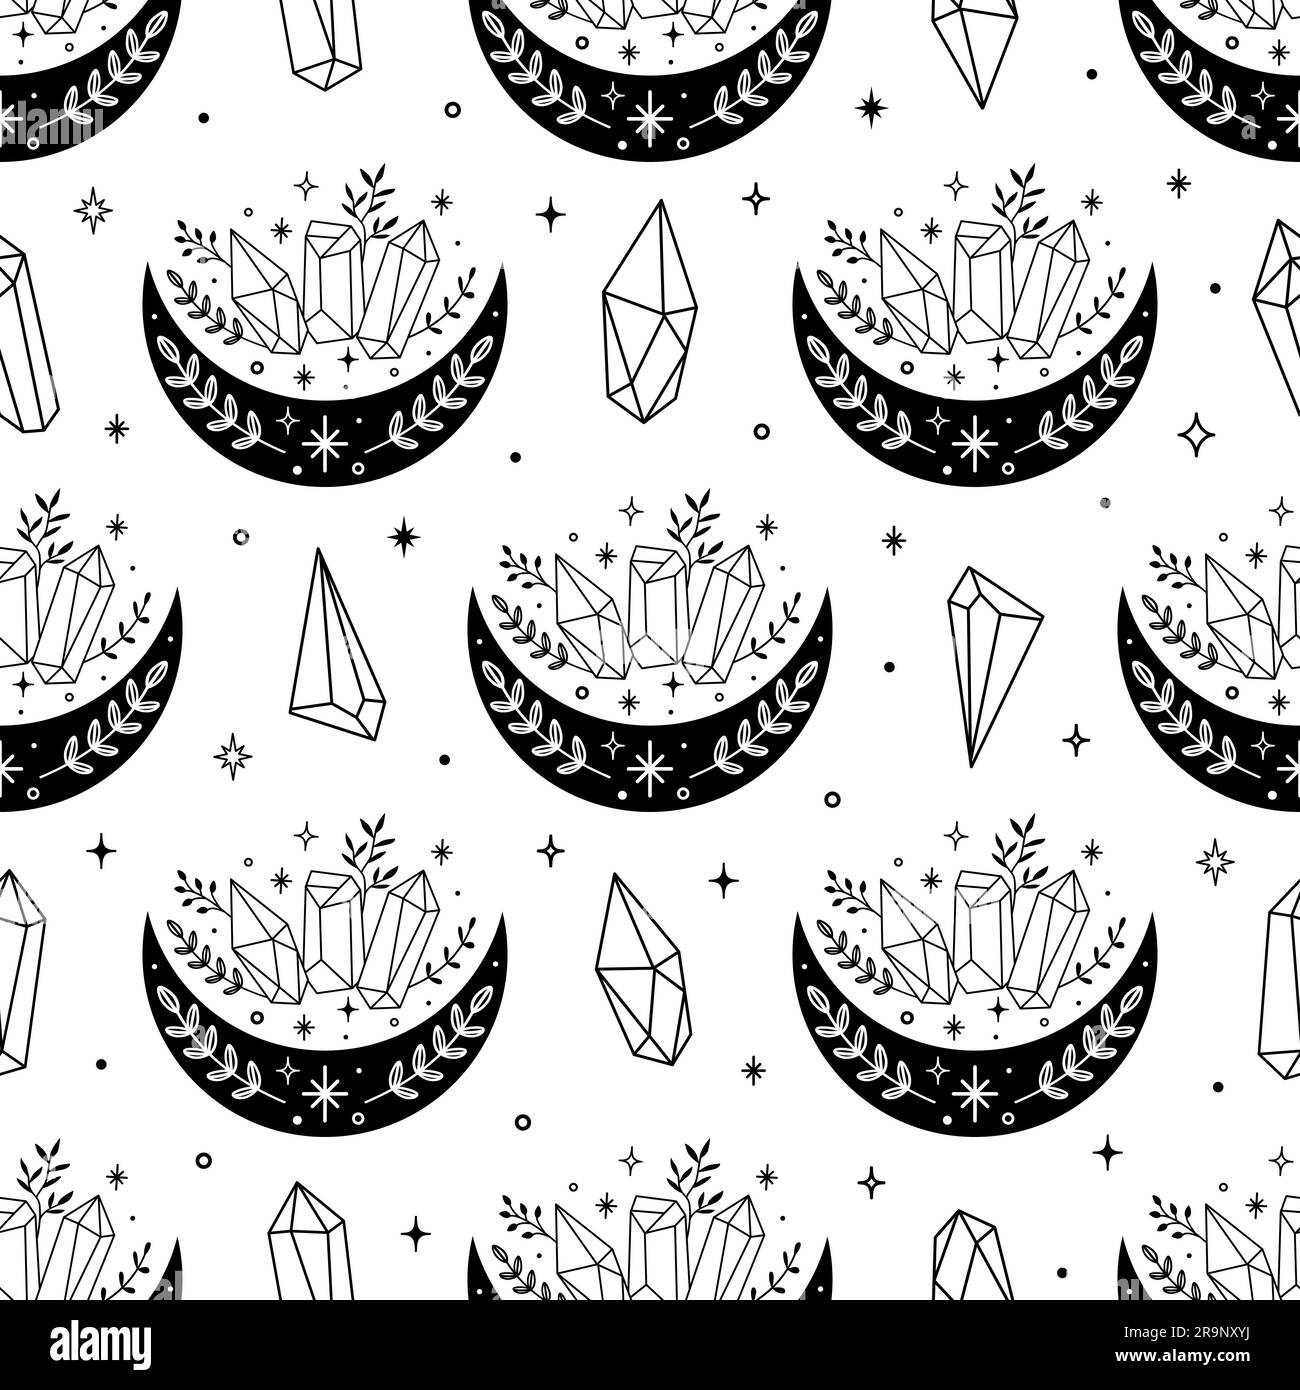 Vector magic celestial seamless pattern with moon, stars and mystic crystals. Boho abstract esoteric background with witchcraft symbols for fashion, f Stock Vector